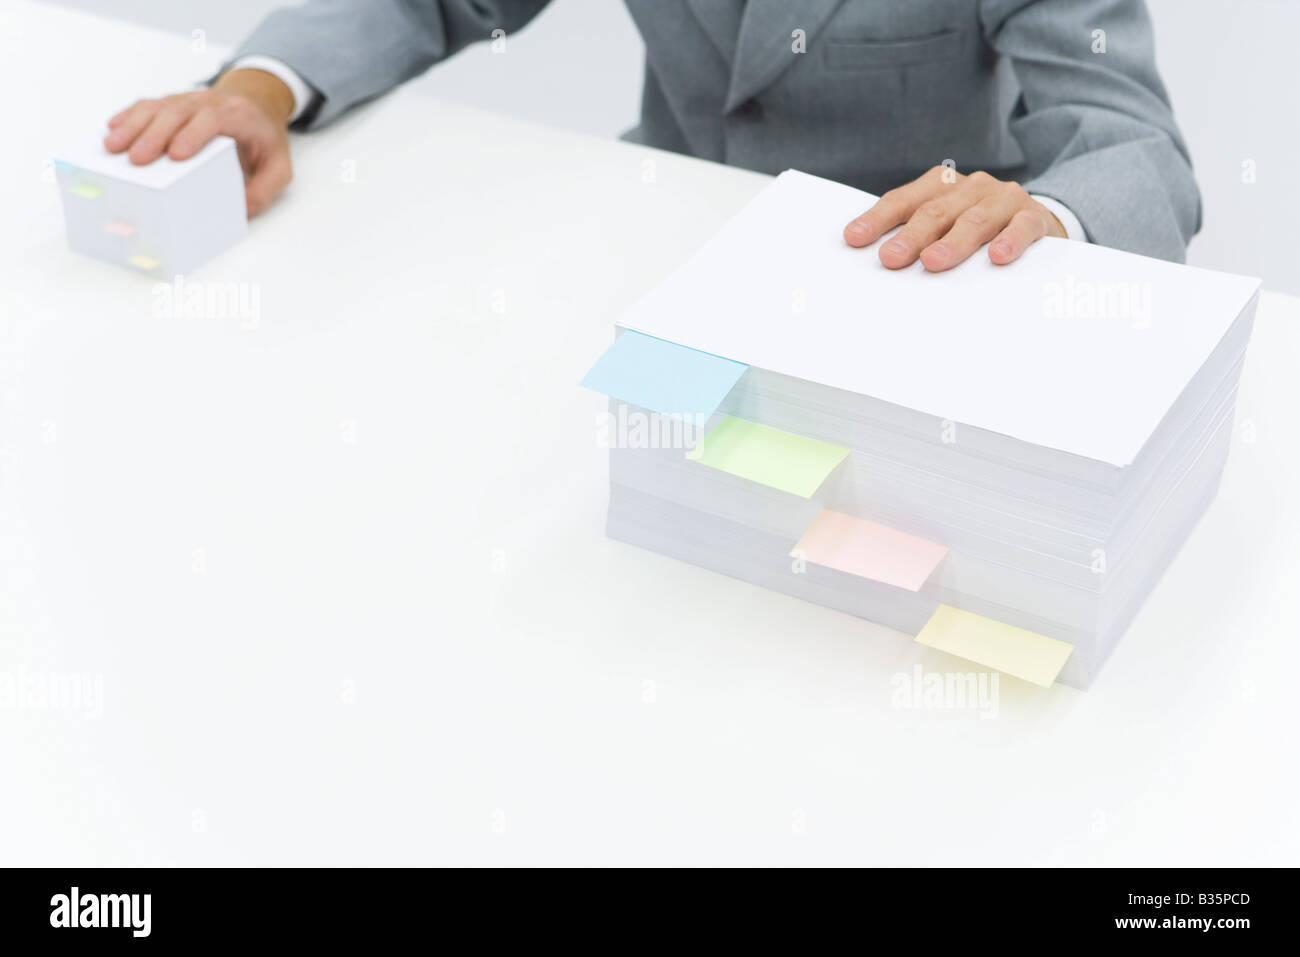 Stacks of paper with adhesive notes dividing them, man putting one hand on each stack Stock Photo